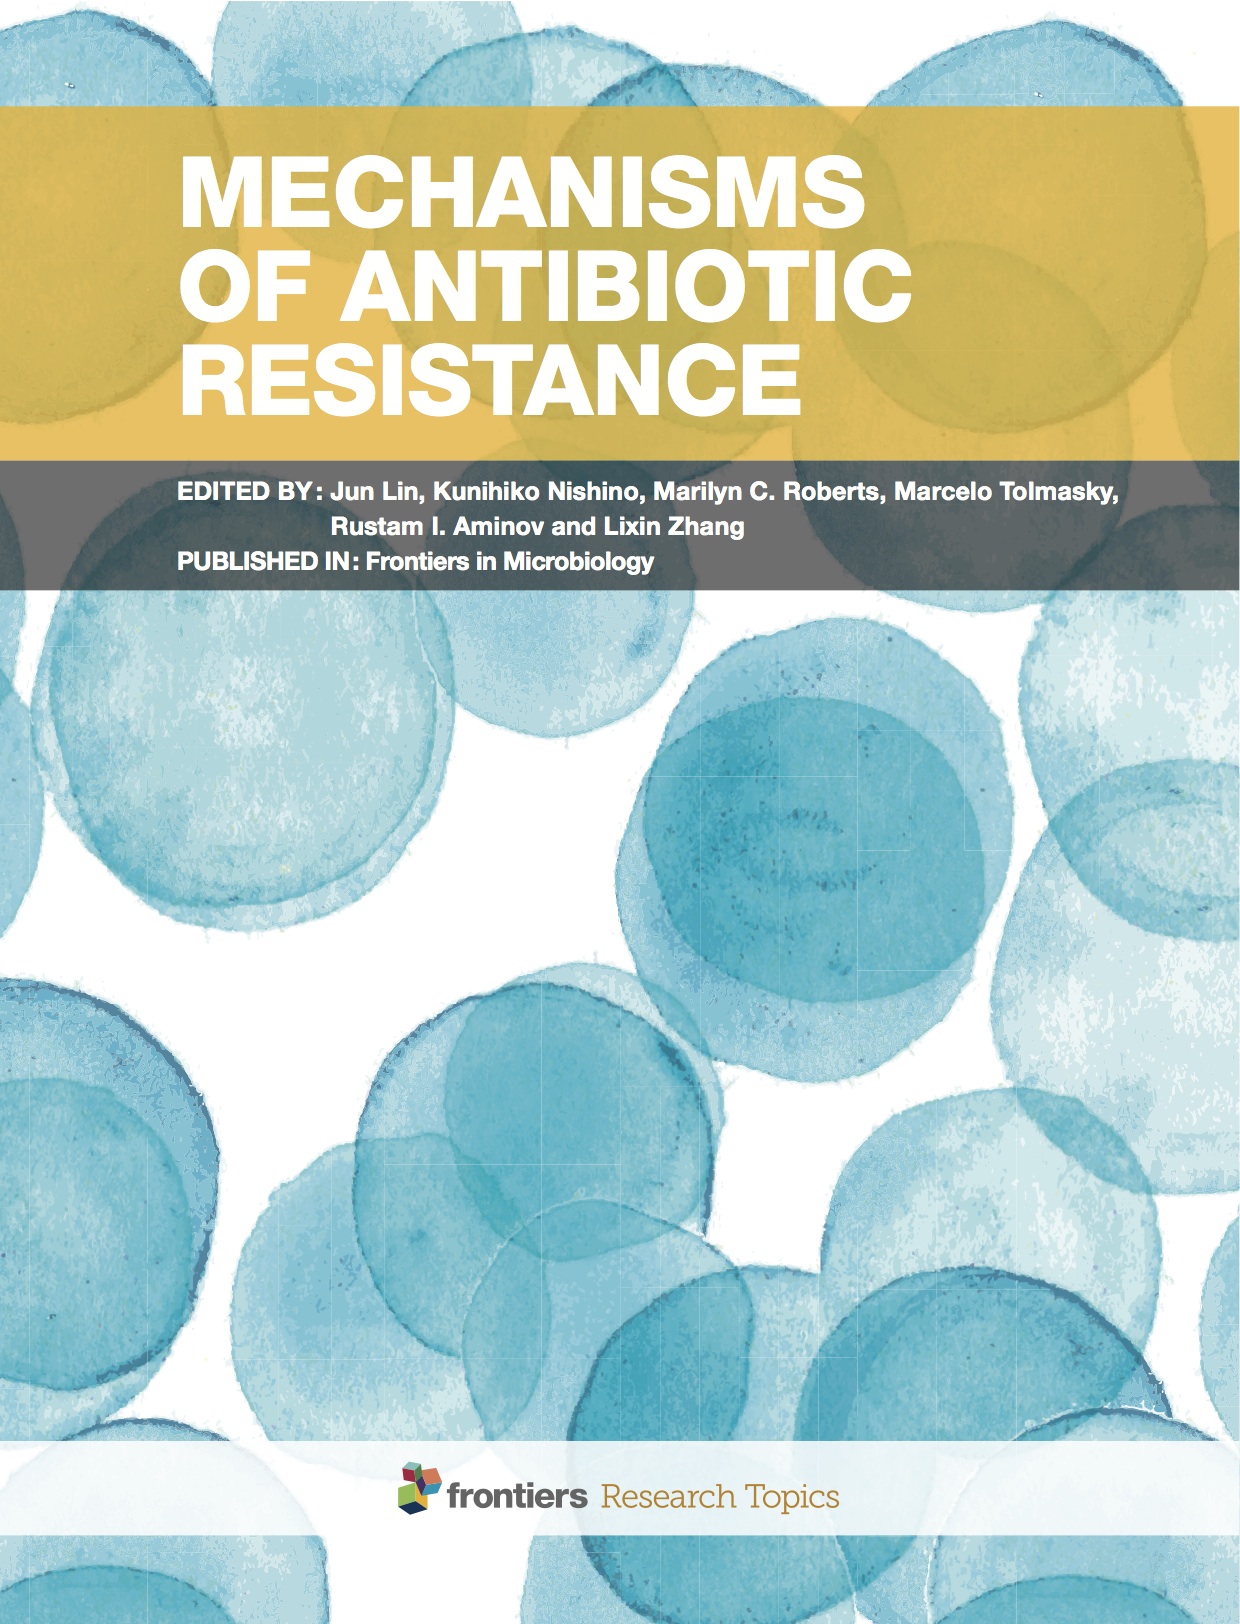 Book Cover: Mechanisms of antibiotic resistance